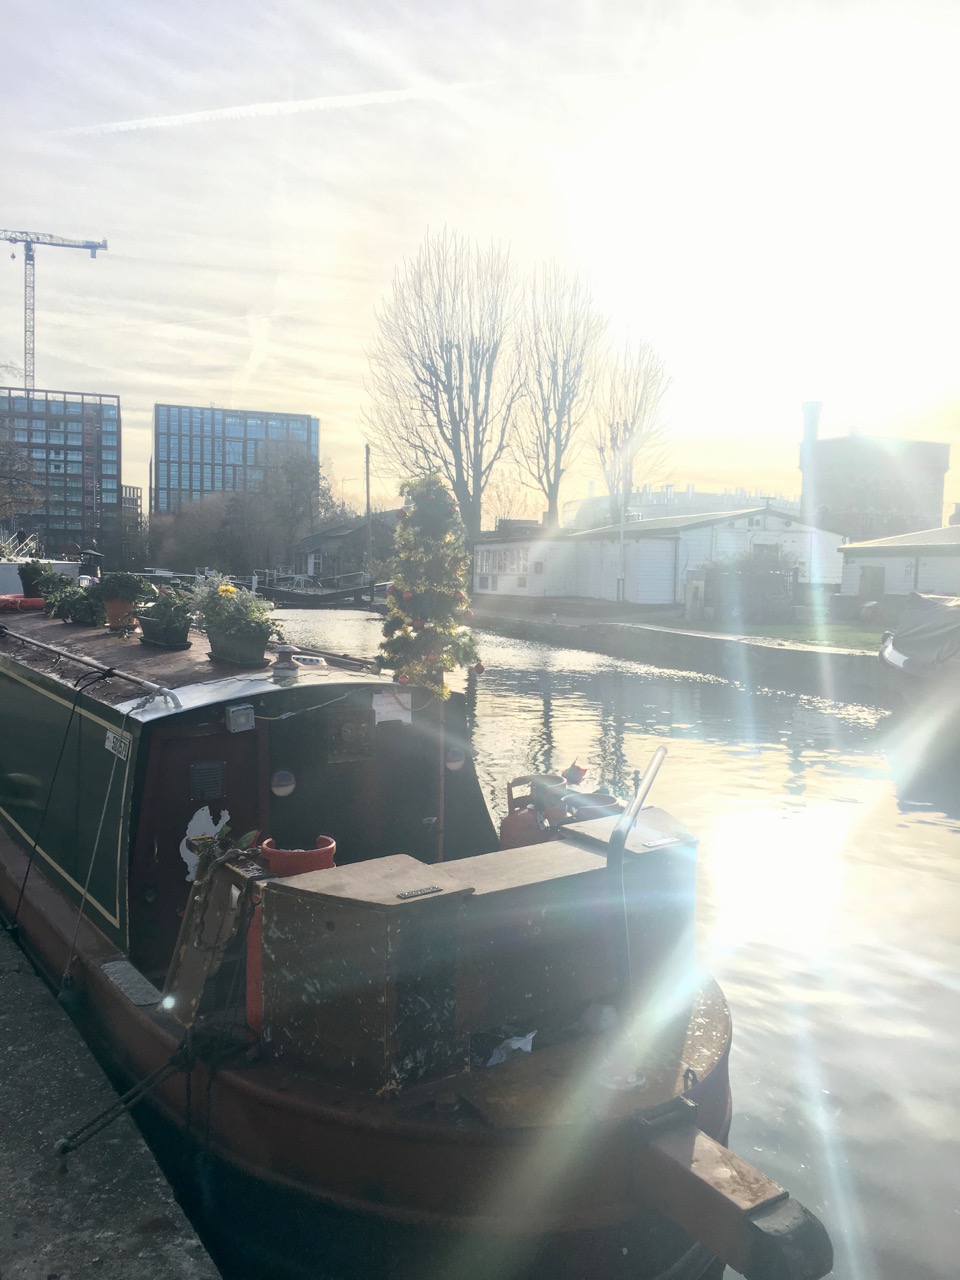 Canal, Boxing Day, London